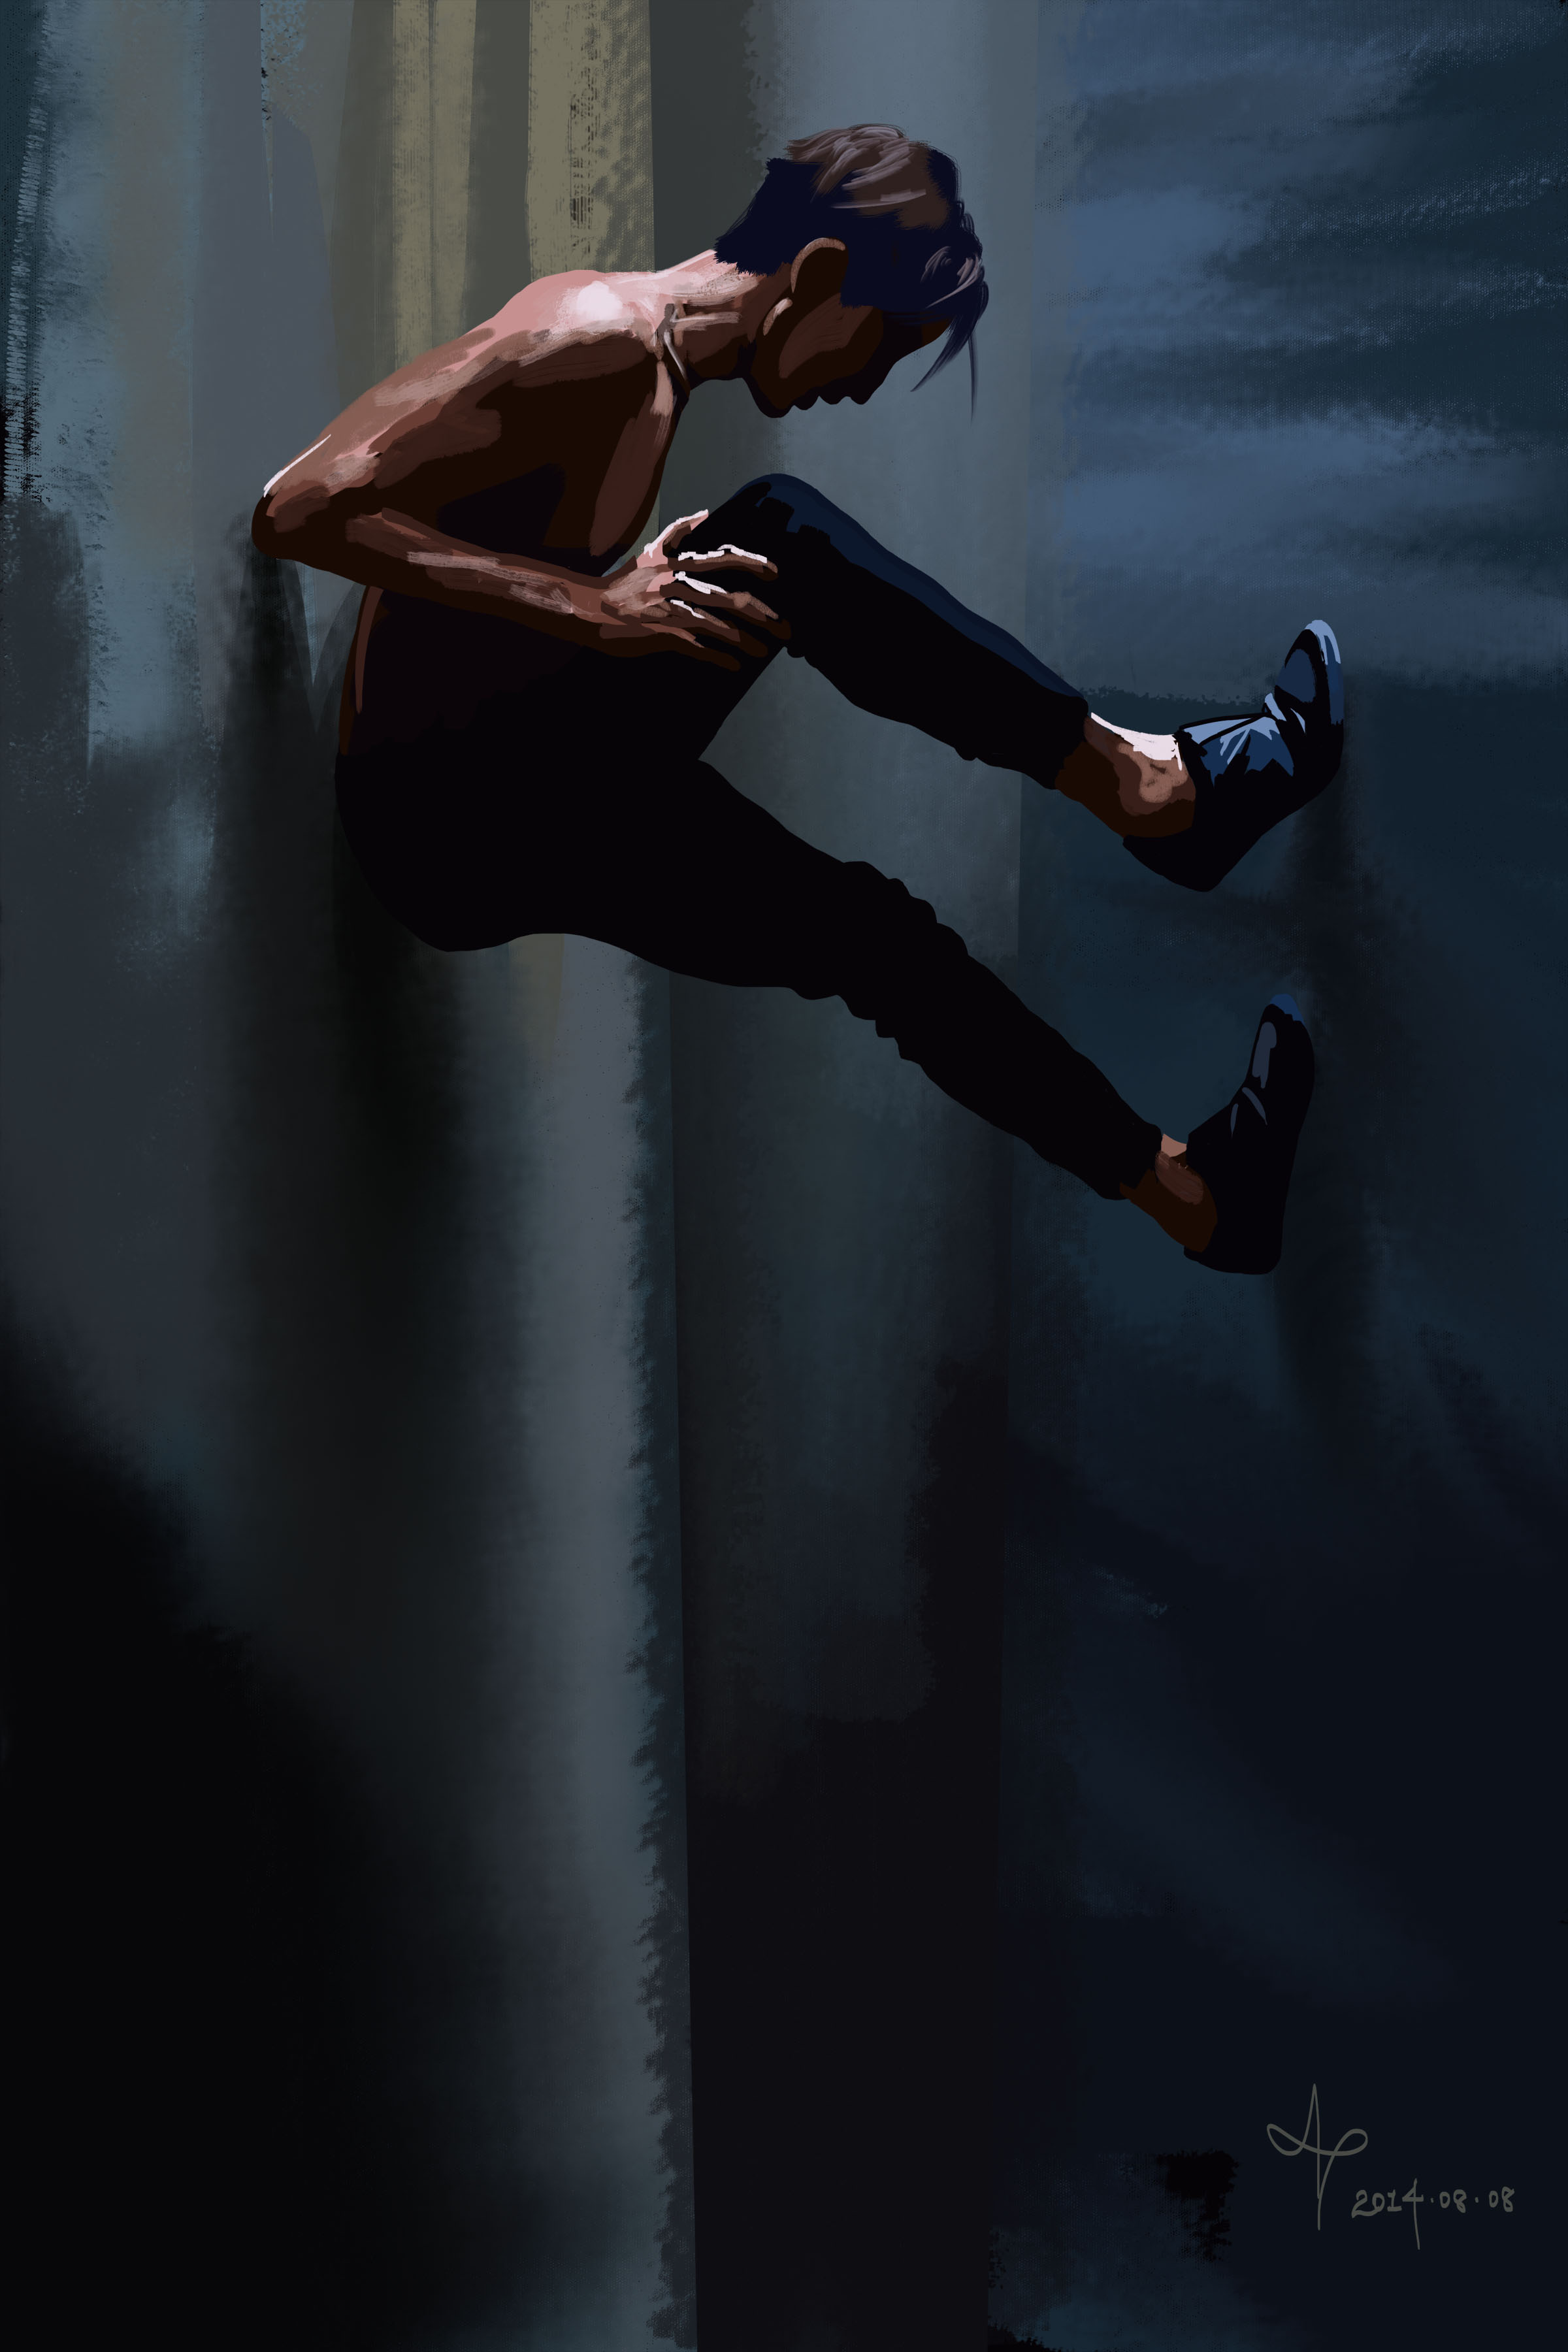 A digital painting of a man ensconced in a narrow space between two walls. His back is against one wall and his feet are braced against the other.